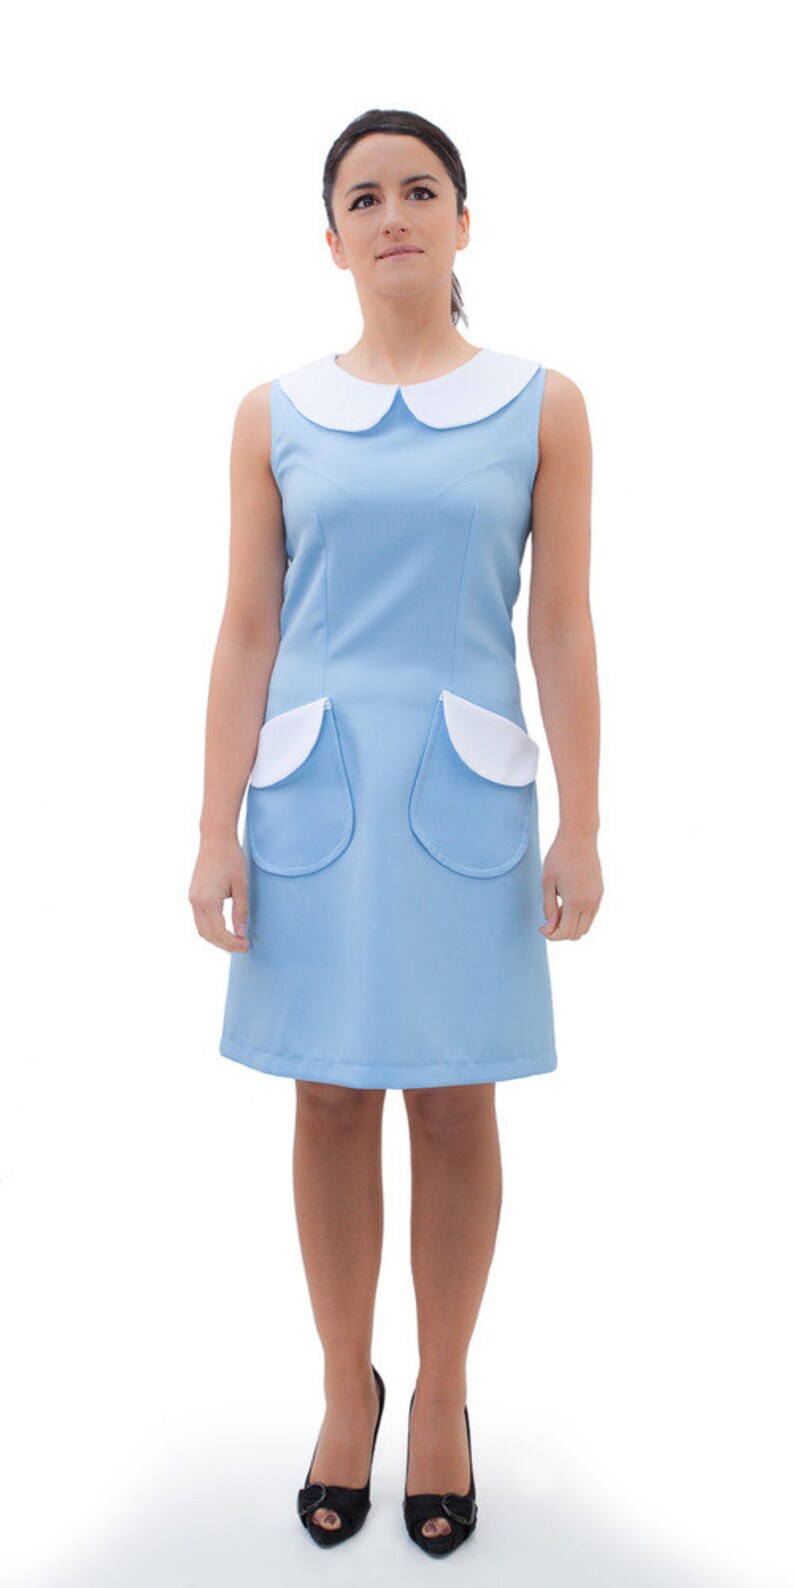 light blue dress with white collar